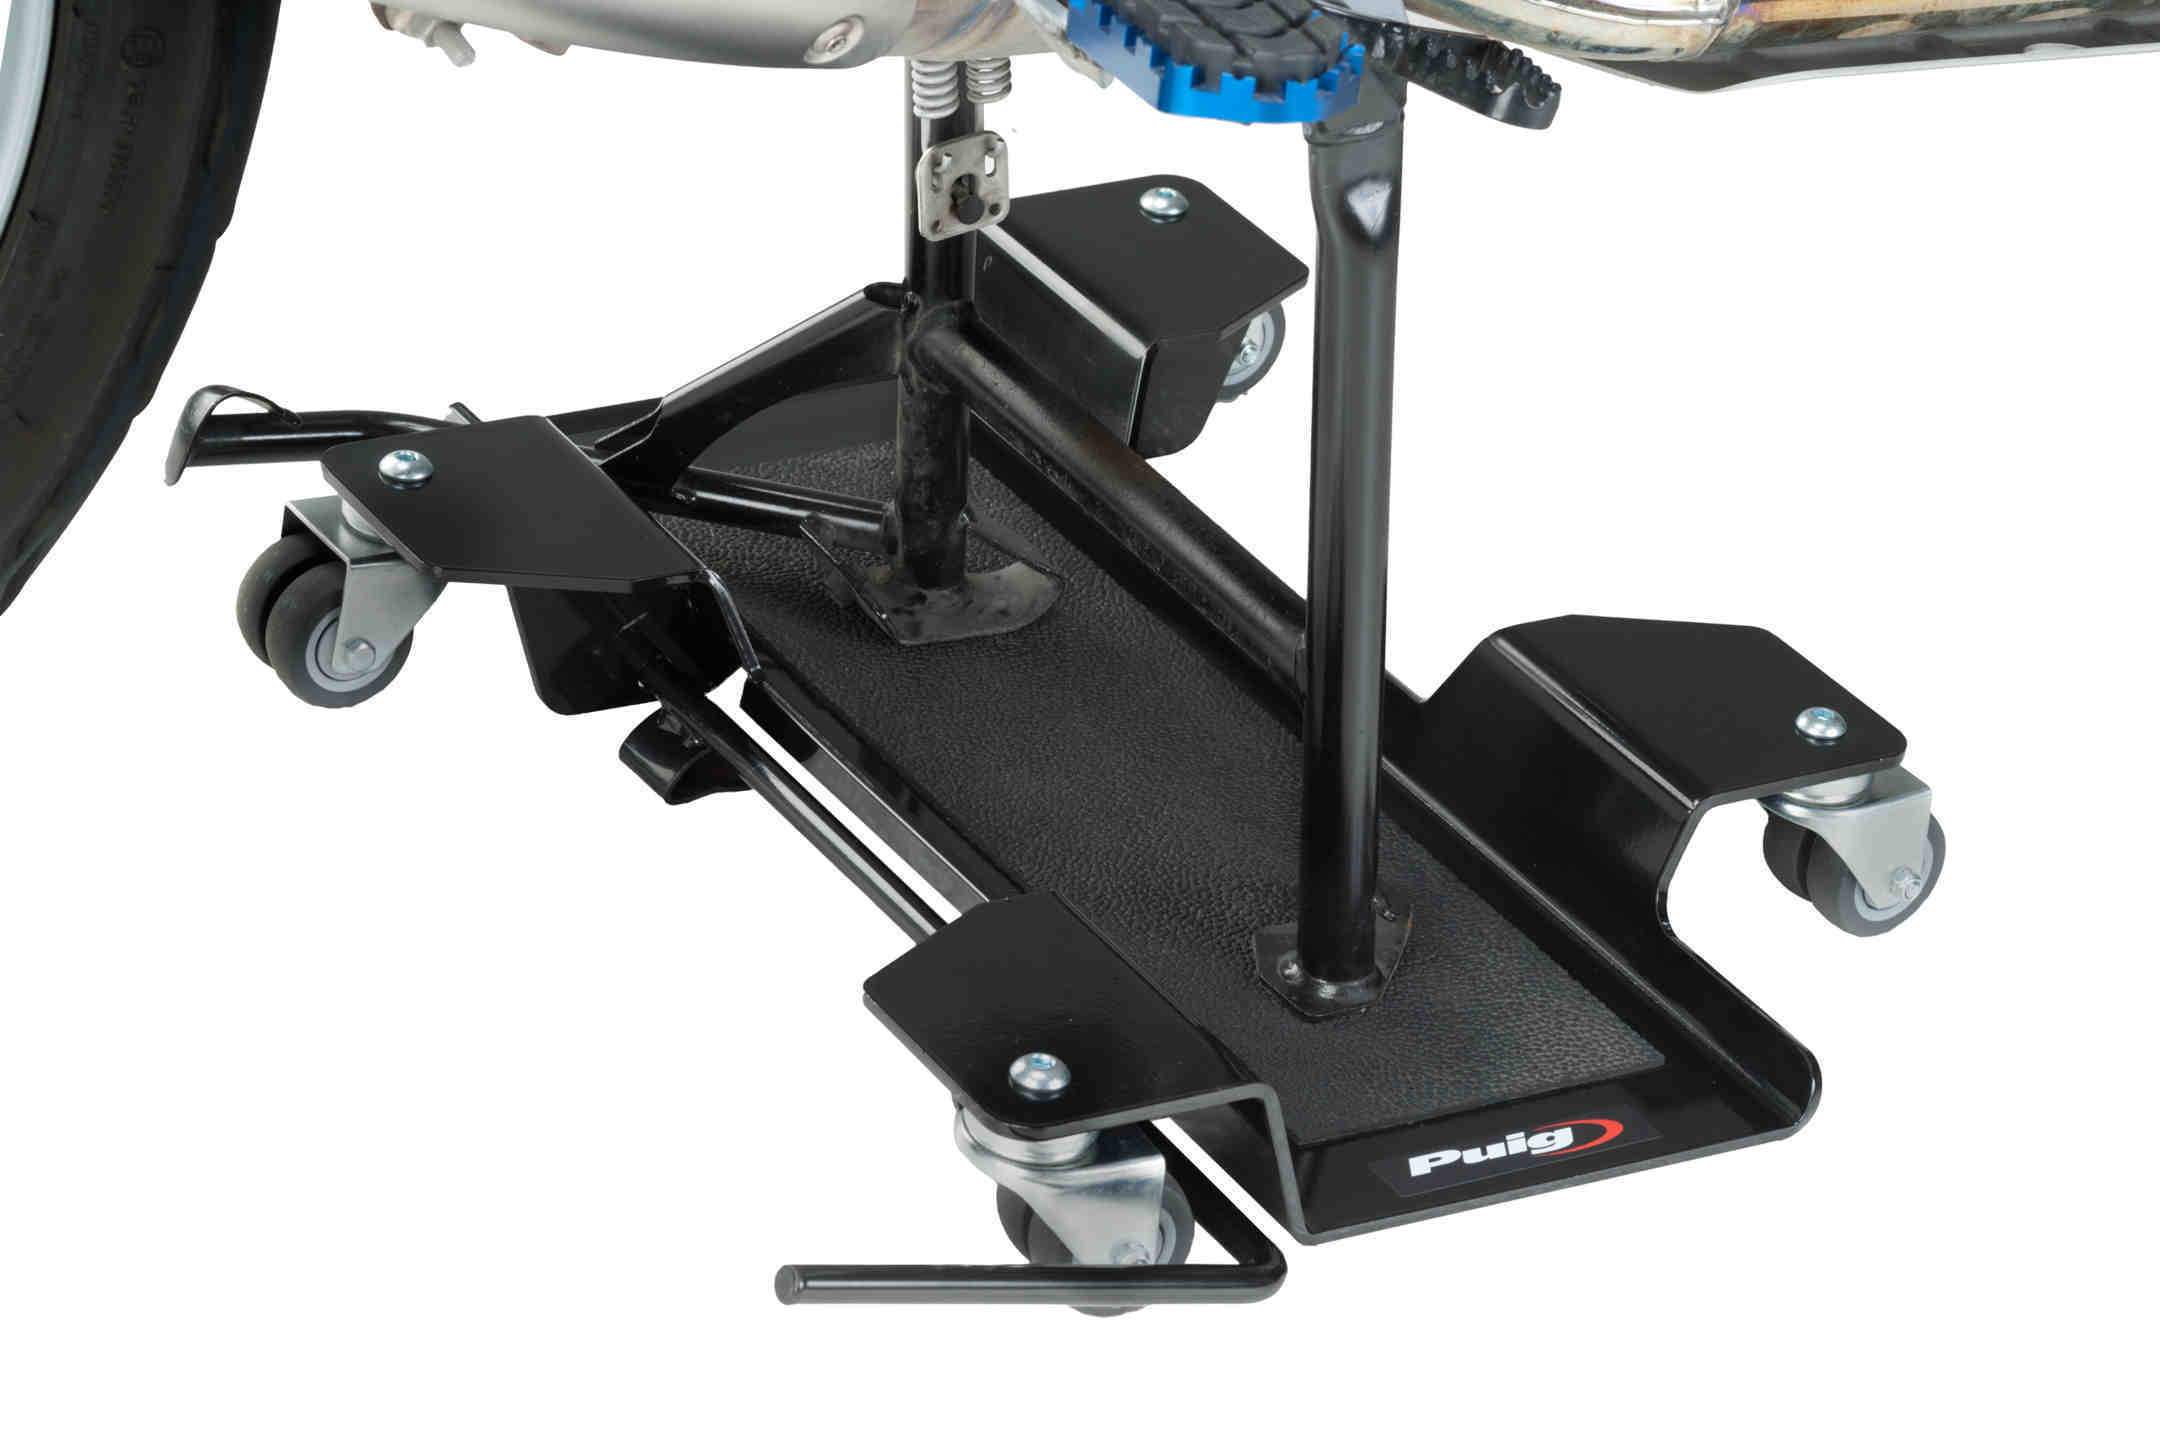 Puig Base Park & Move For Centre Stands | Black-M9974N-Bike Stands-Pyramid Motorcycle Accessories